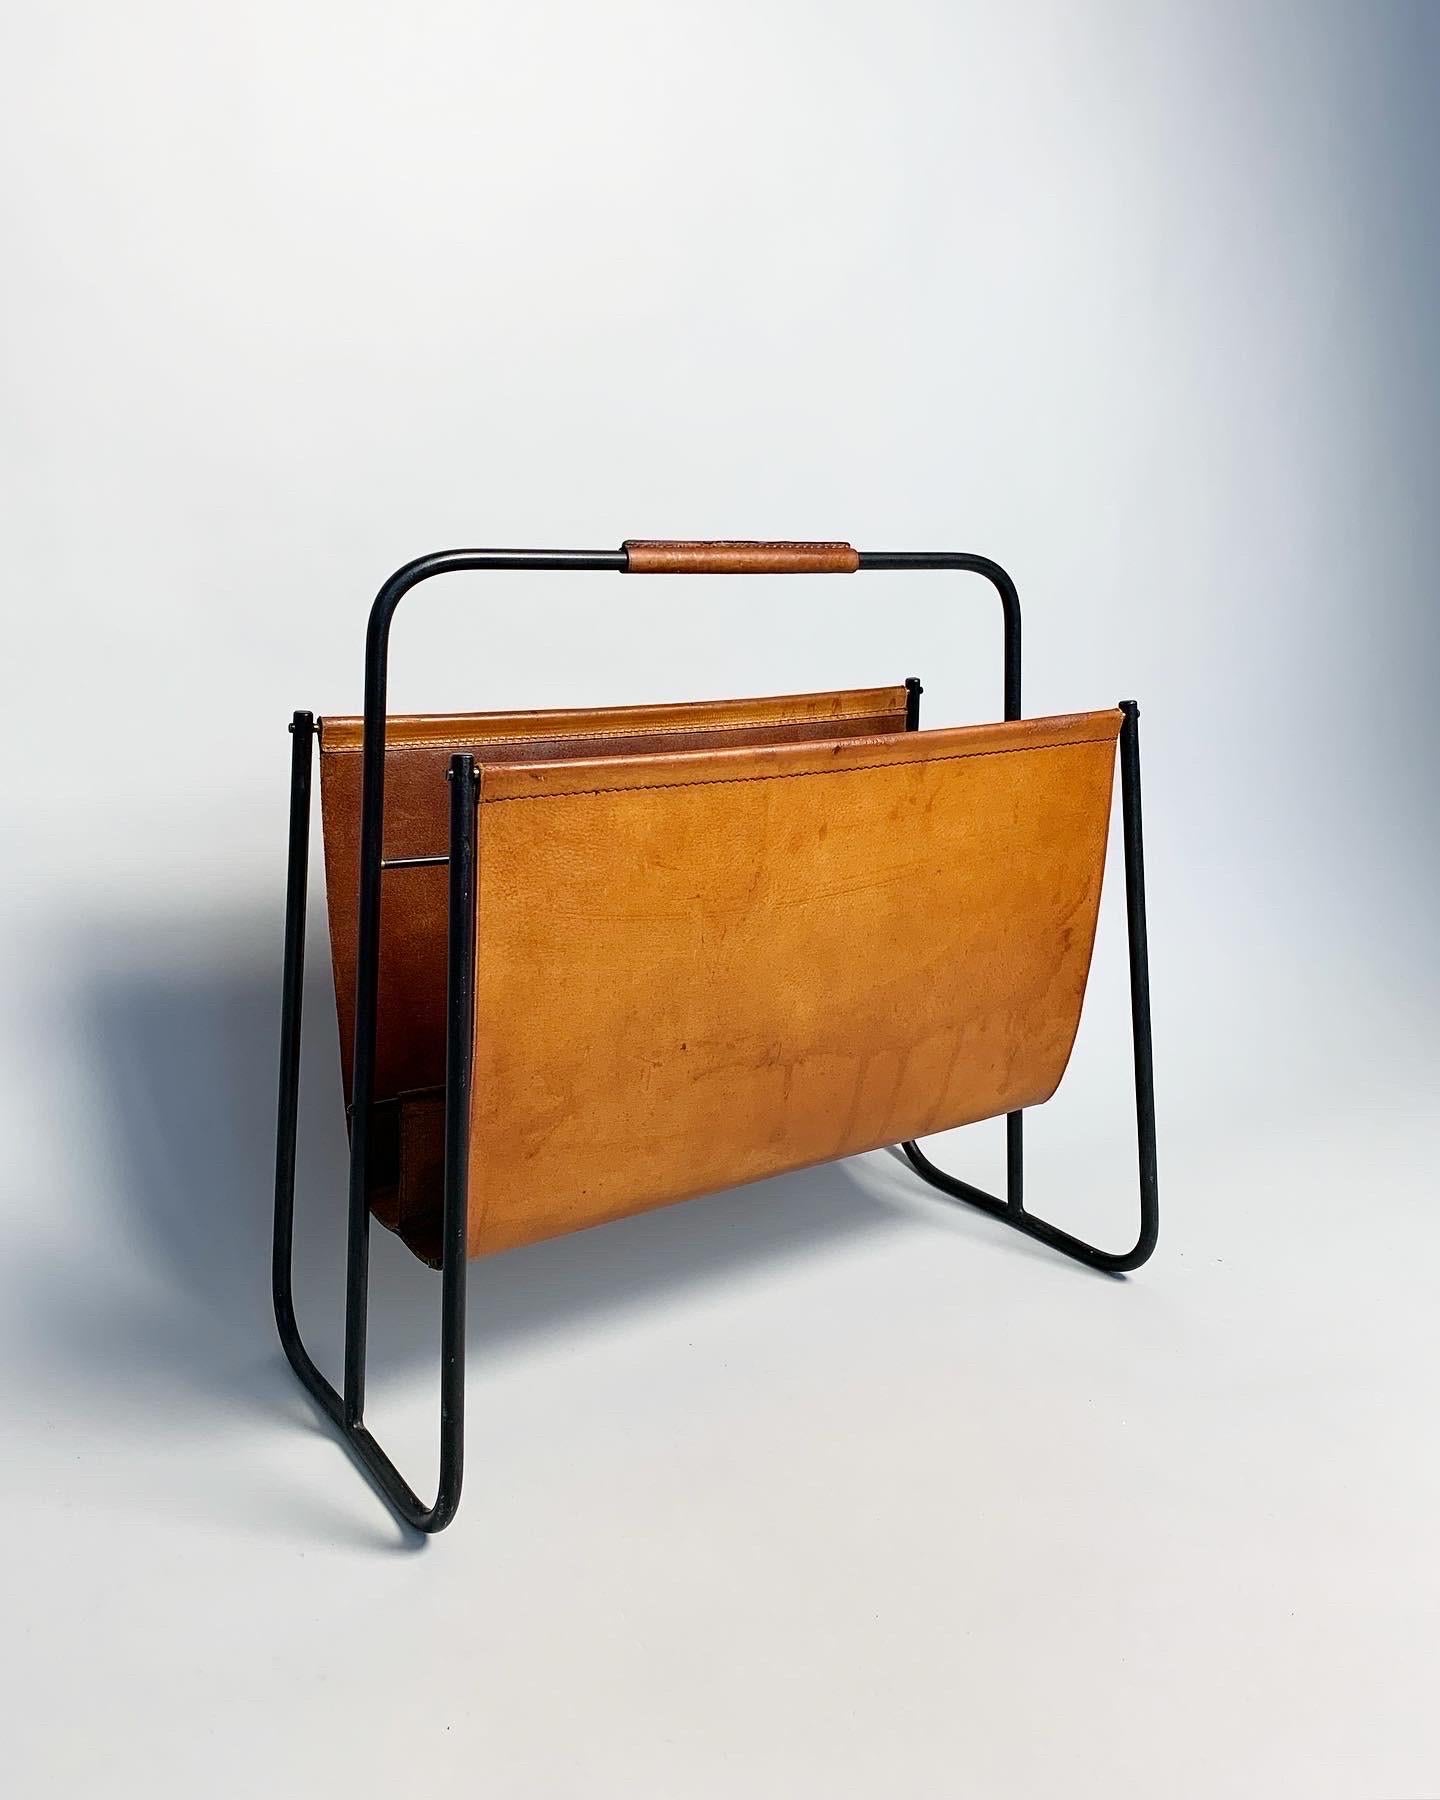 Rarely seen Carl Auböck magazine rack with a black frame, hand crafted by the Auböck workshop in Vienna, Austria in the 1950s.

Solid, hand shaped in blackened steel, stitched leather with a strong patina.

Measures: Width: 46 cm
Depth: 25